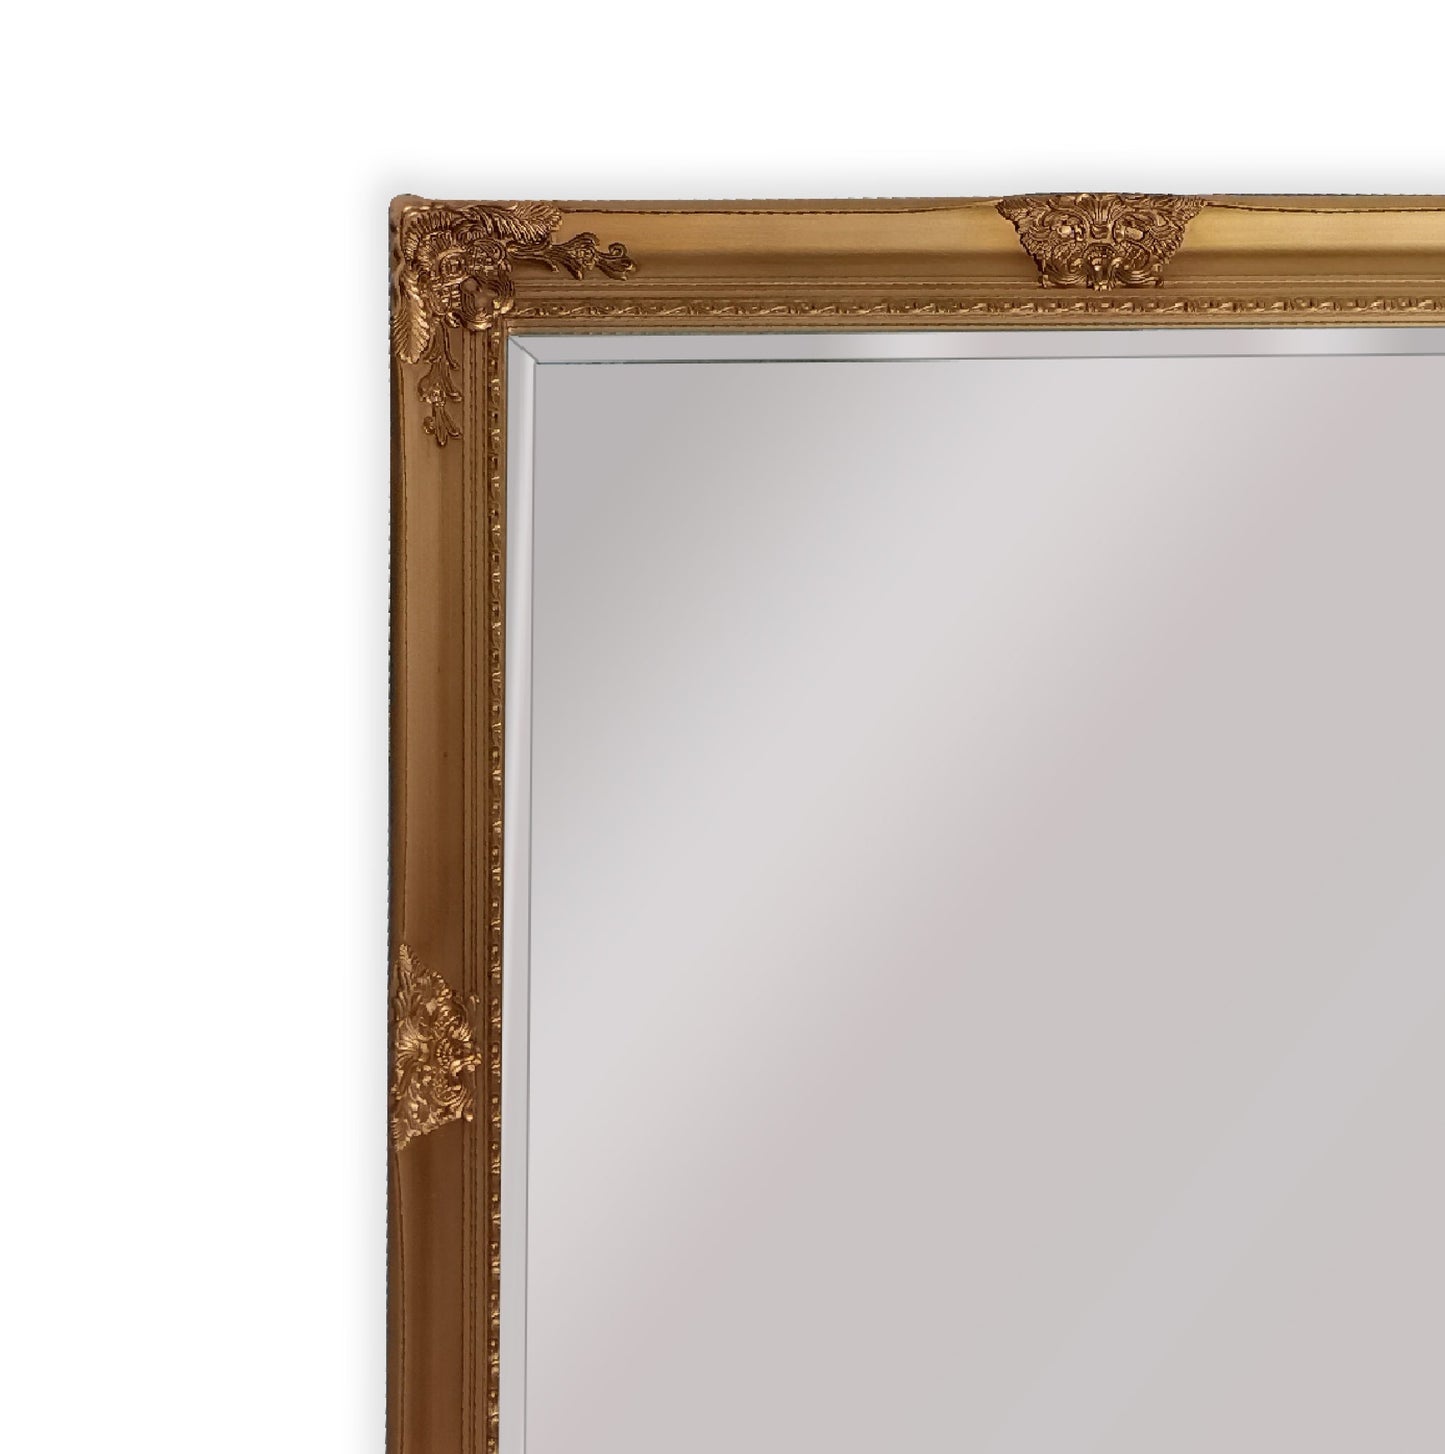 French Provincial Ornate Mirror - Country Gold - Medium 70cm x 170cm - image2